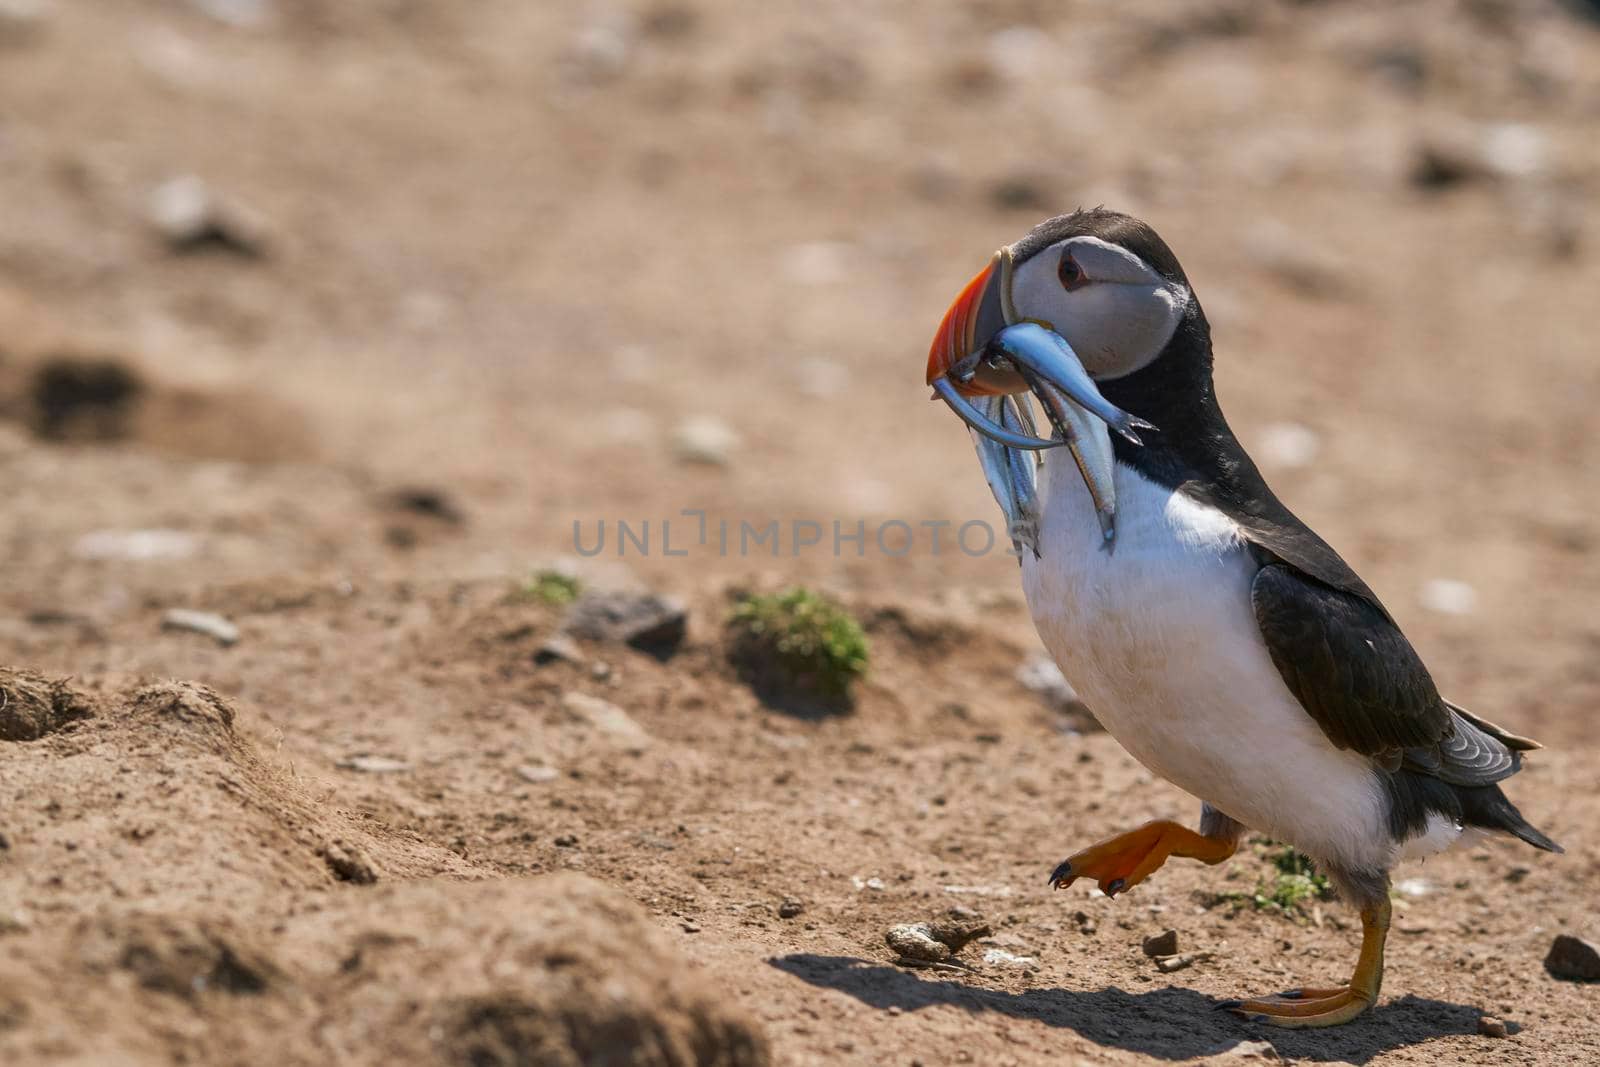 Puffin with fish in beak by JeremyRichards